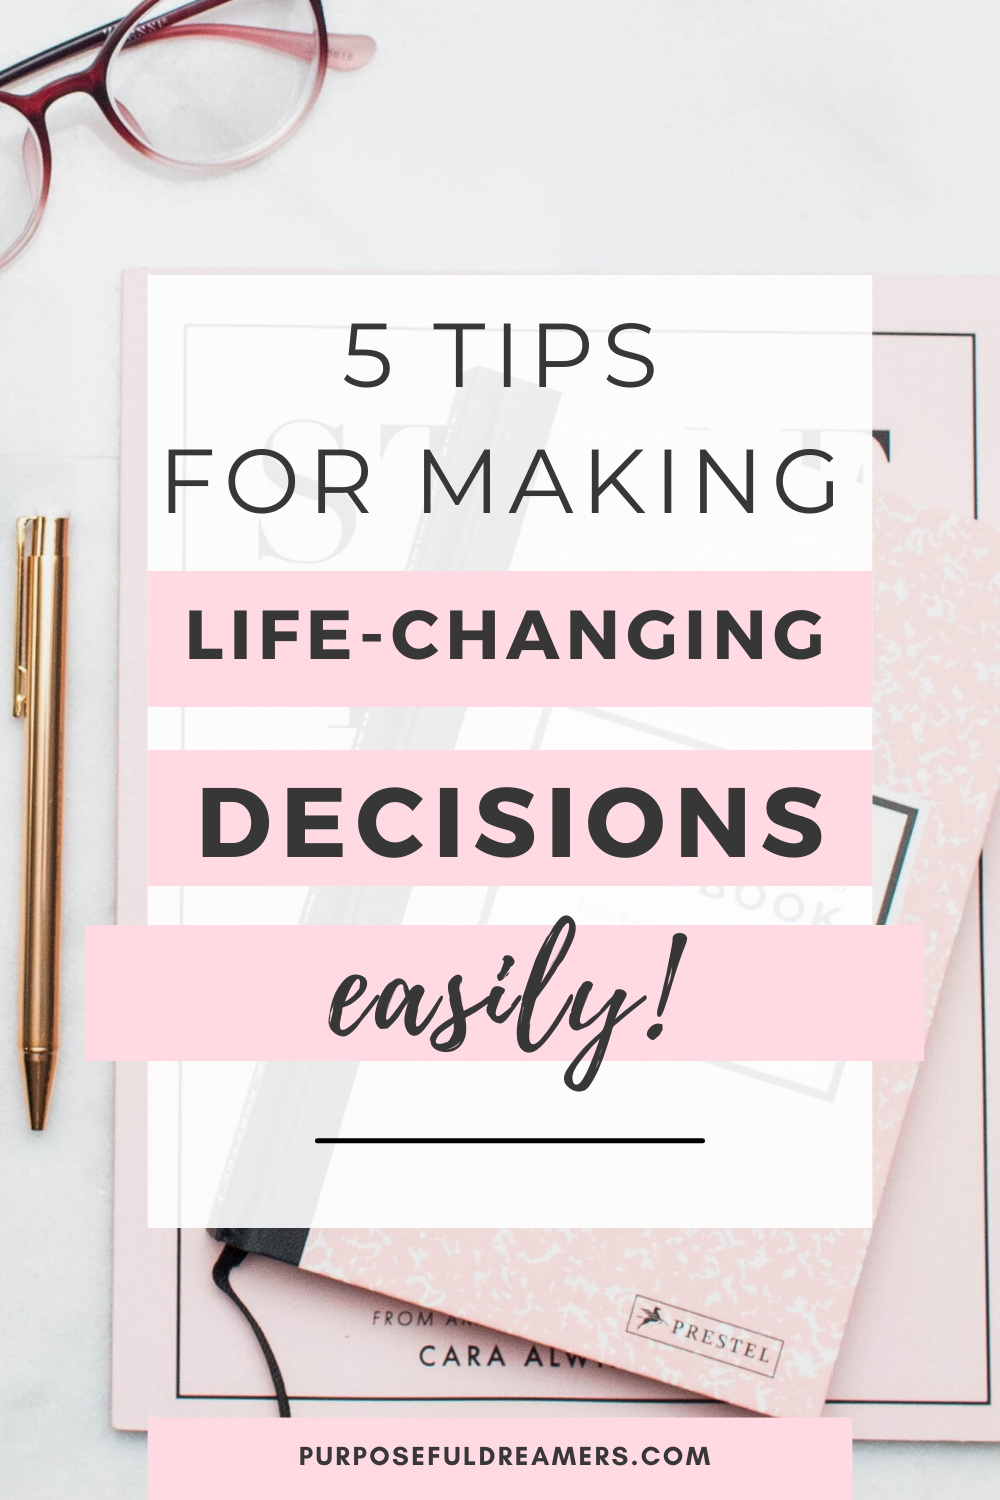 5 Tips to Making Life-Changing Decisions Easily